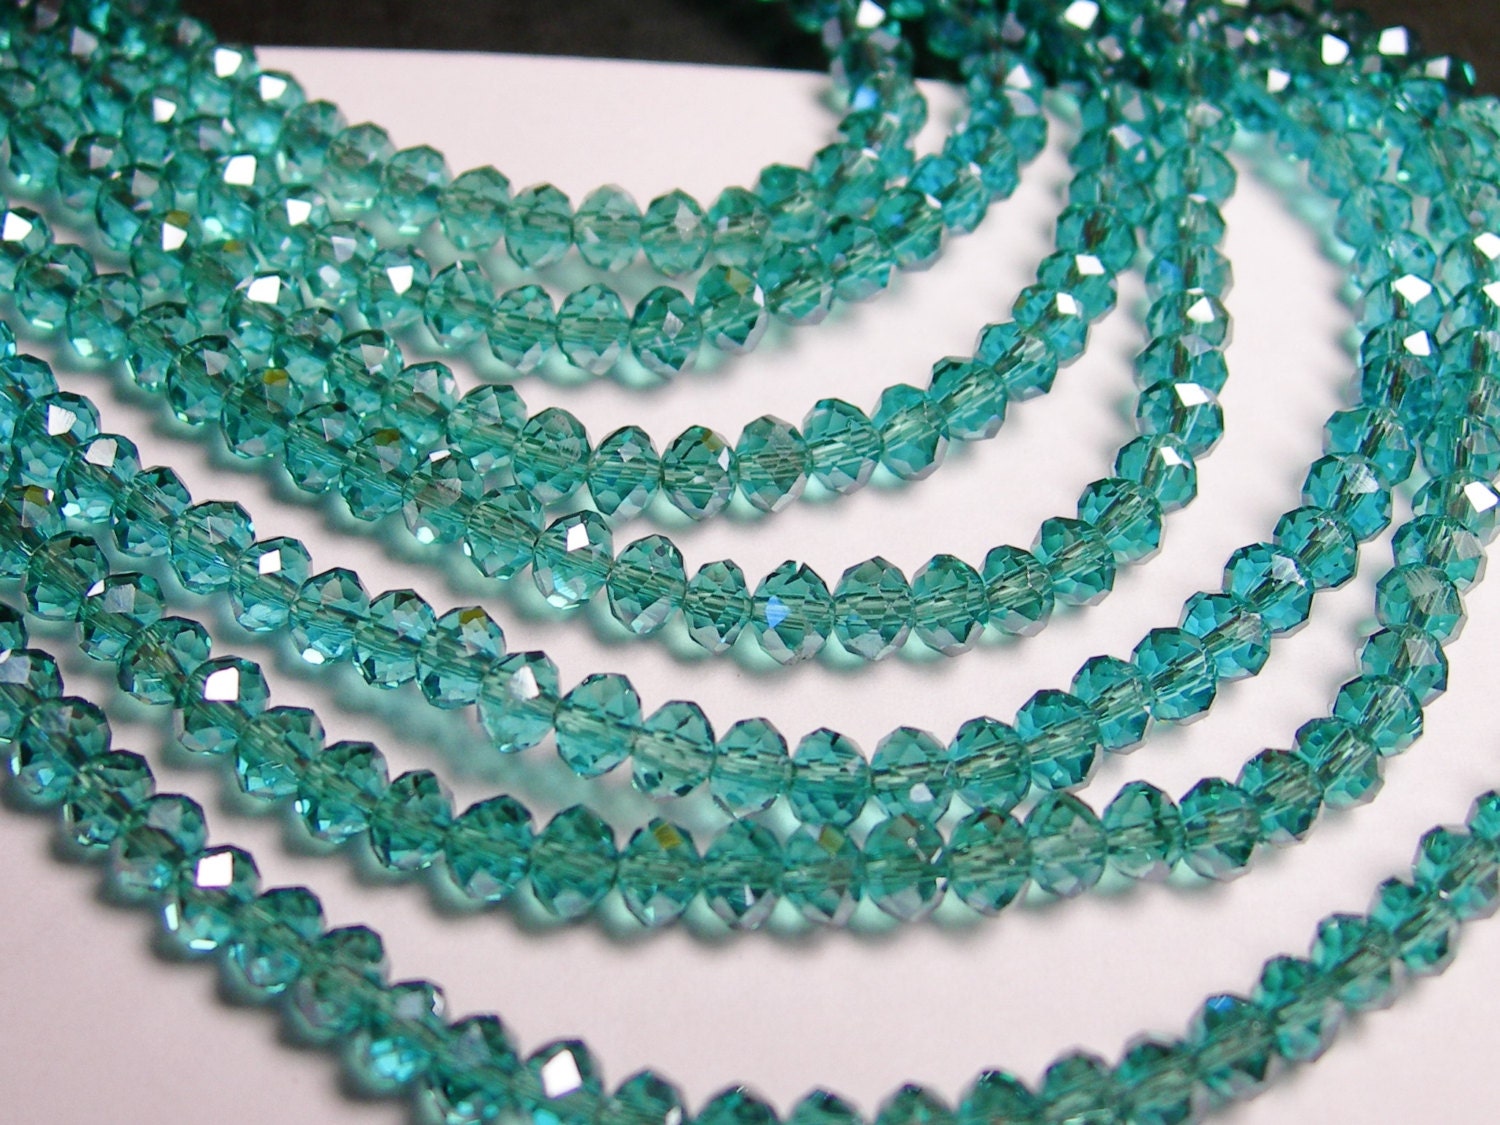 Crystal faceted rondelle - 4mm - 100 beads - aqua - full strand - NCRF2